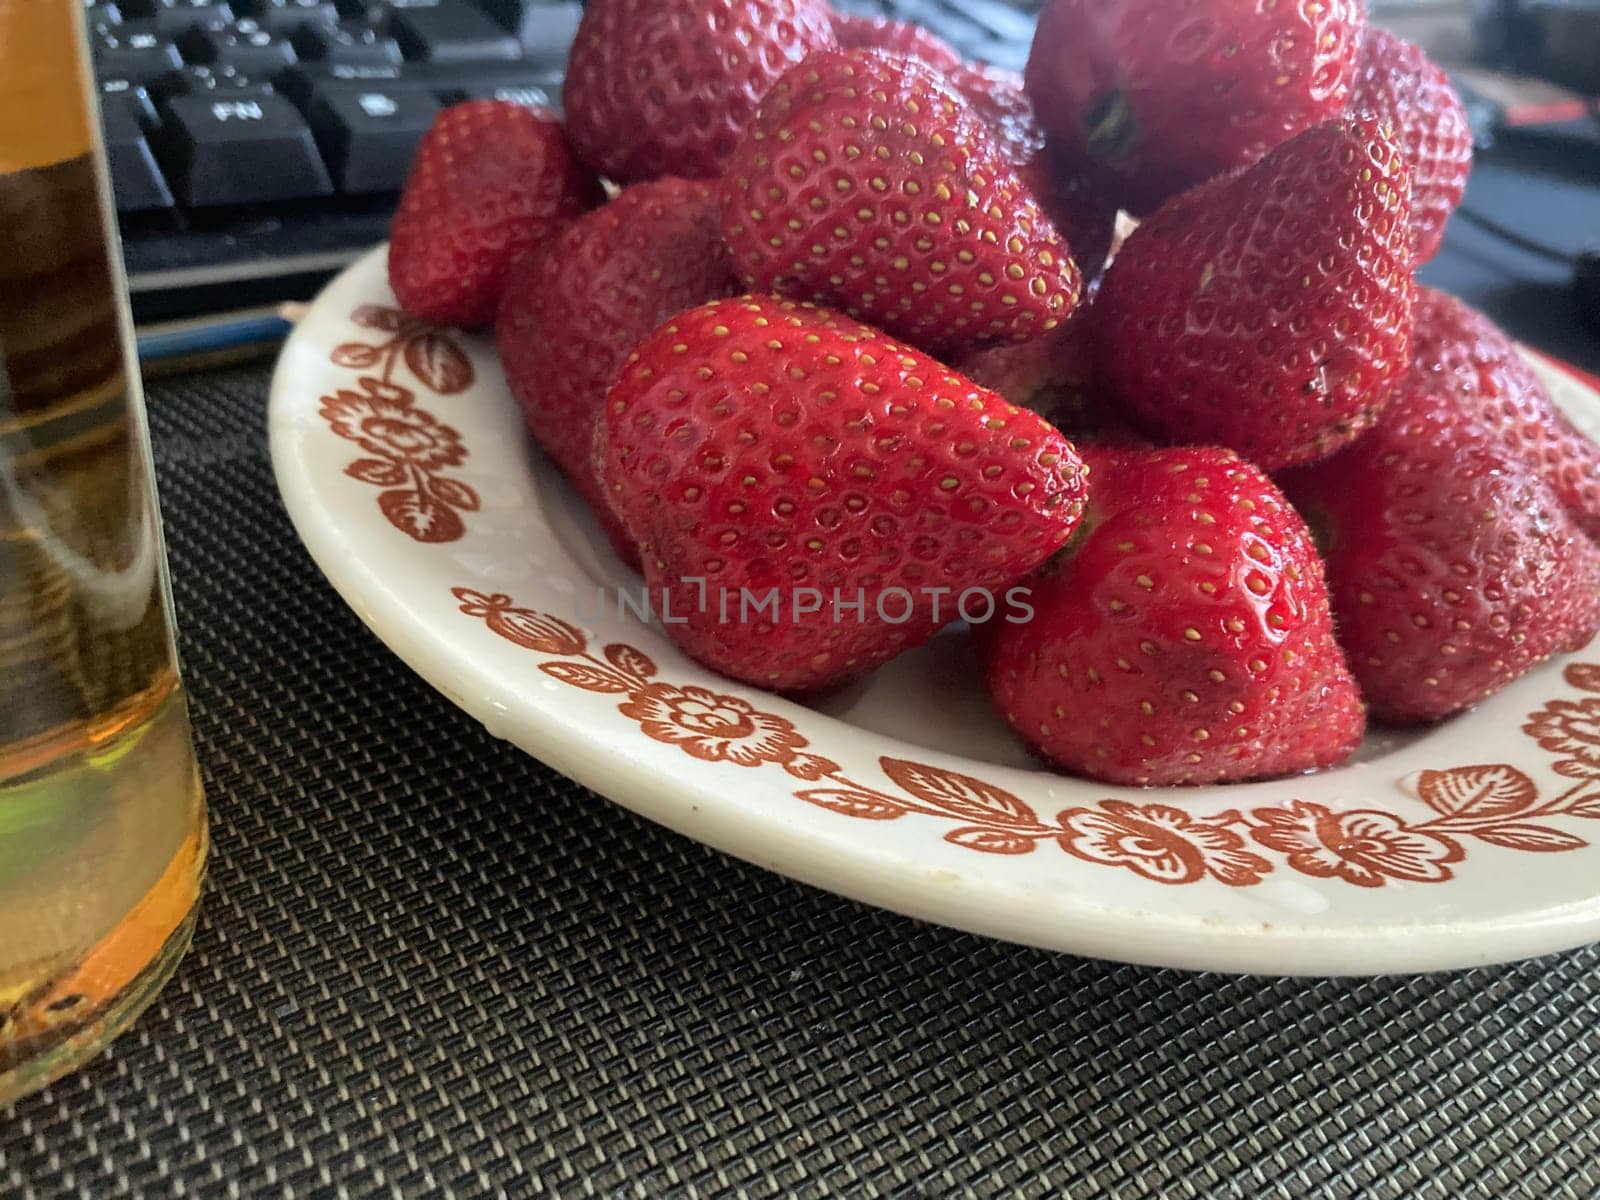 Fresh spring strawberries in a bowl by architectphd